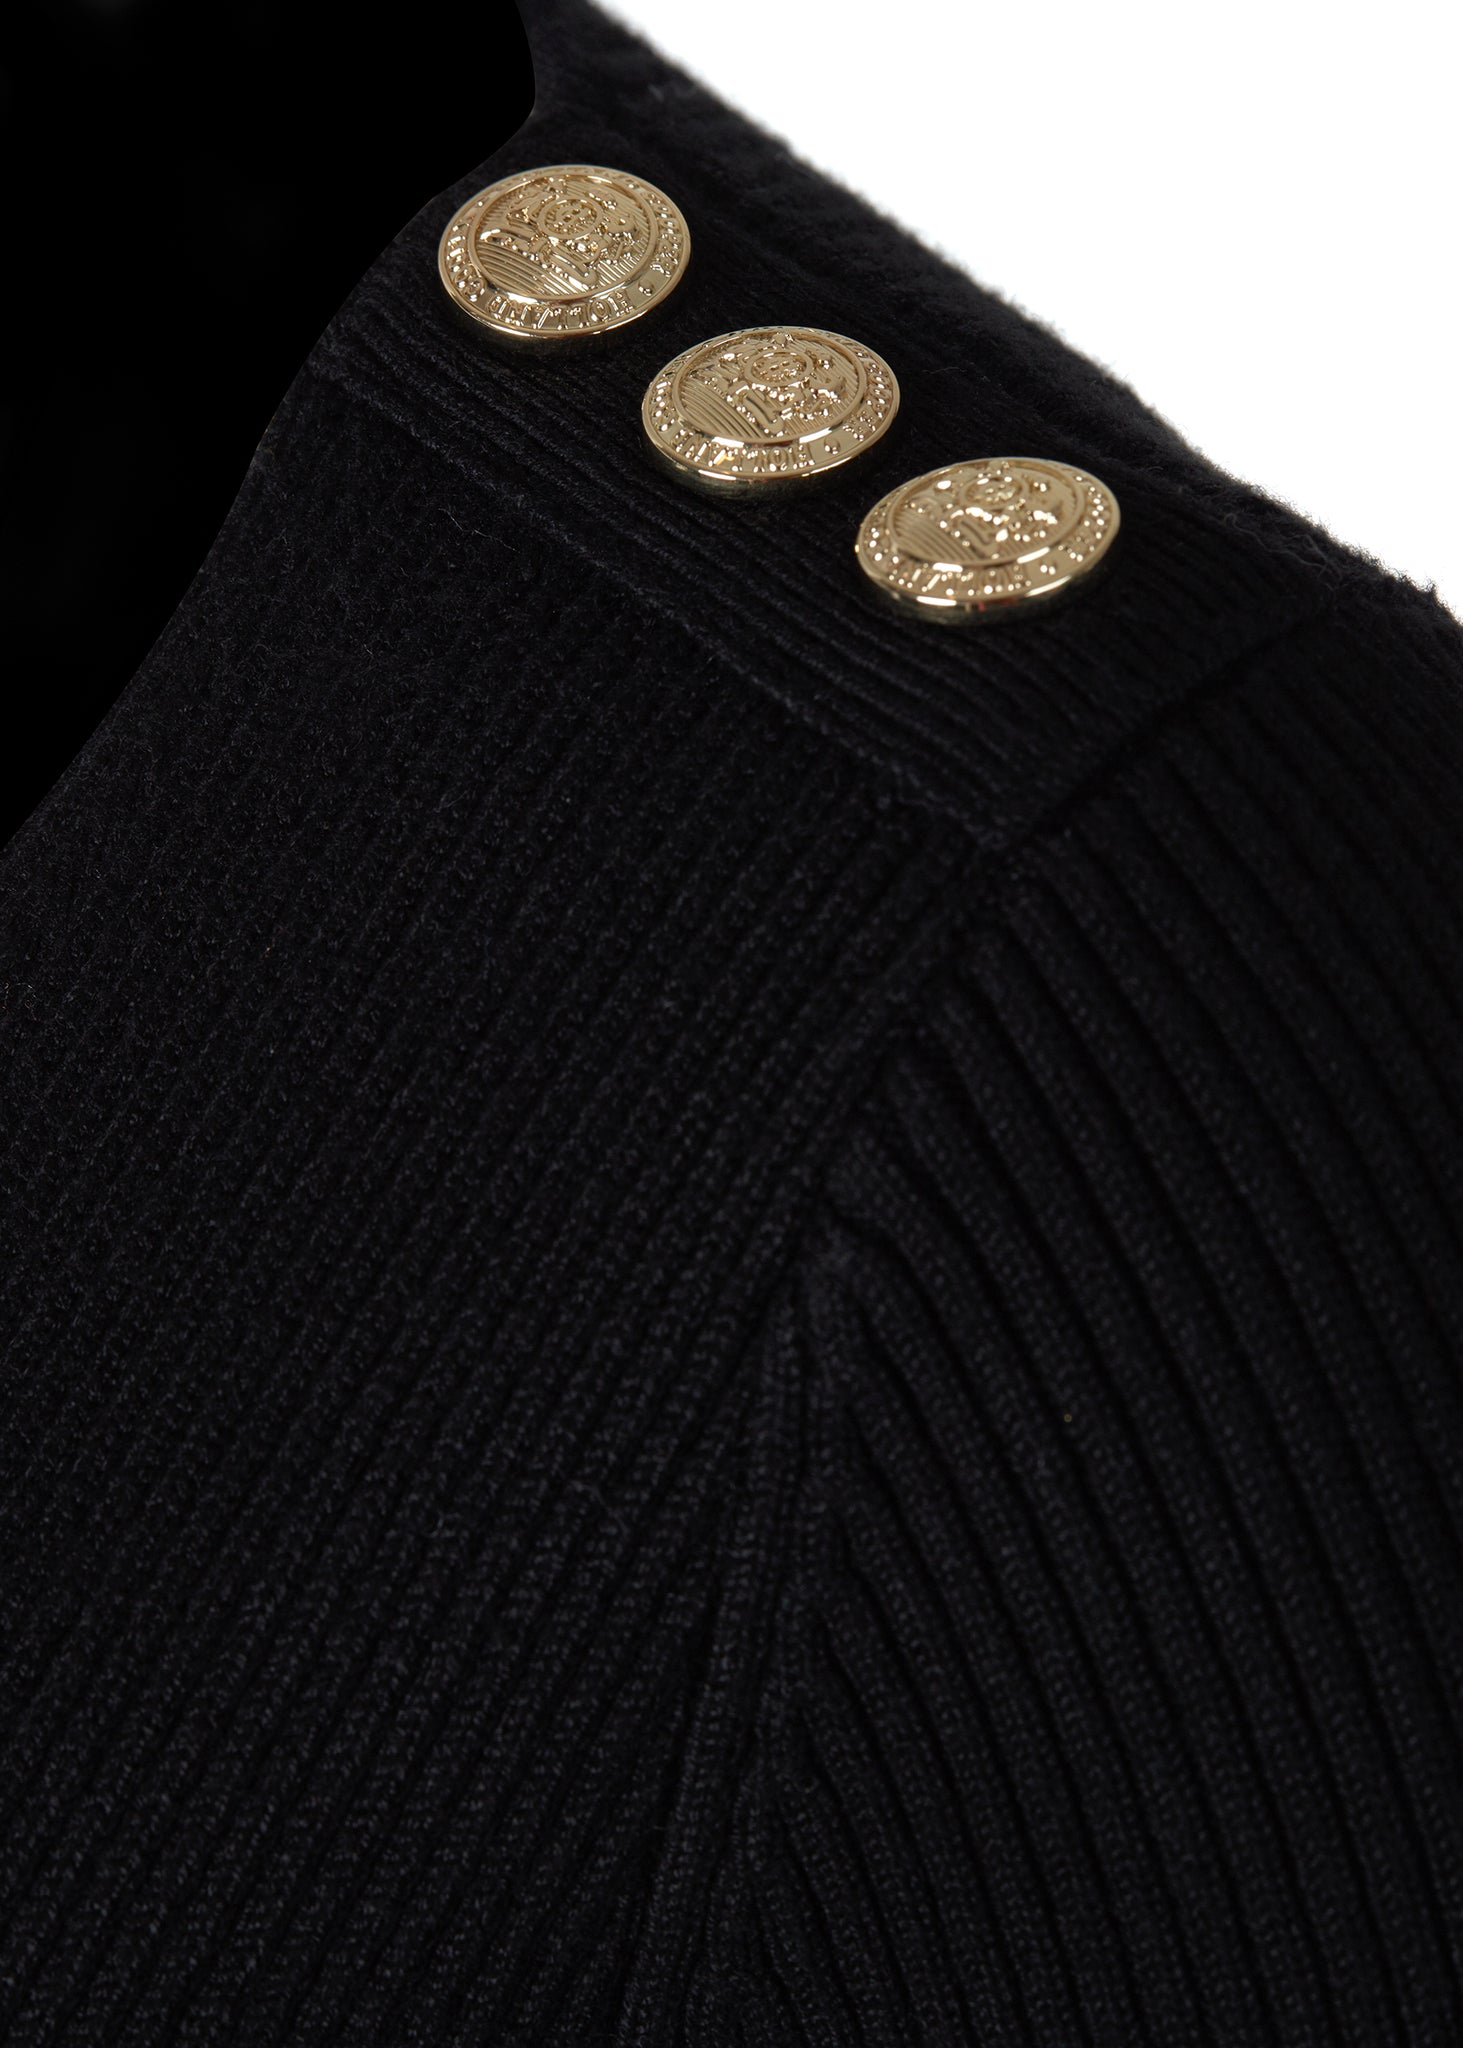 gold button detail across shoulder of womens black long sleeve knitted v neck midi dress with gold buttons on cuffs and shoulders